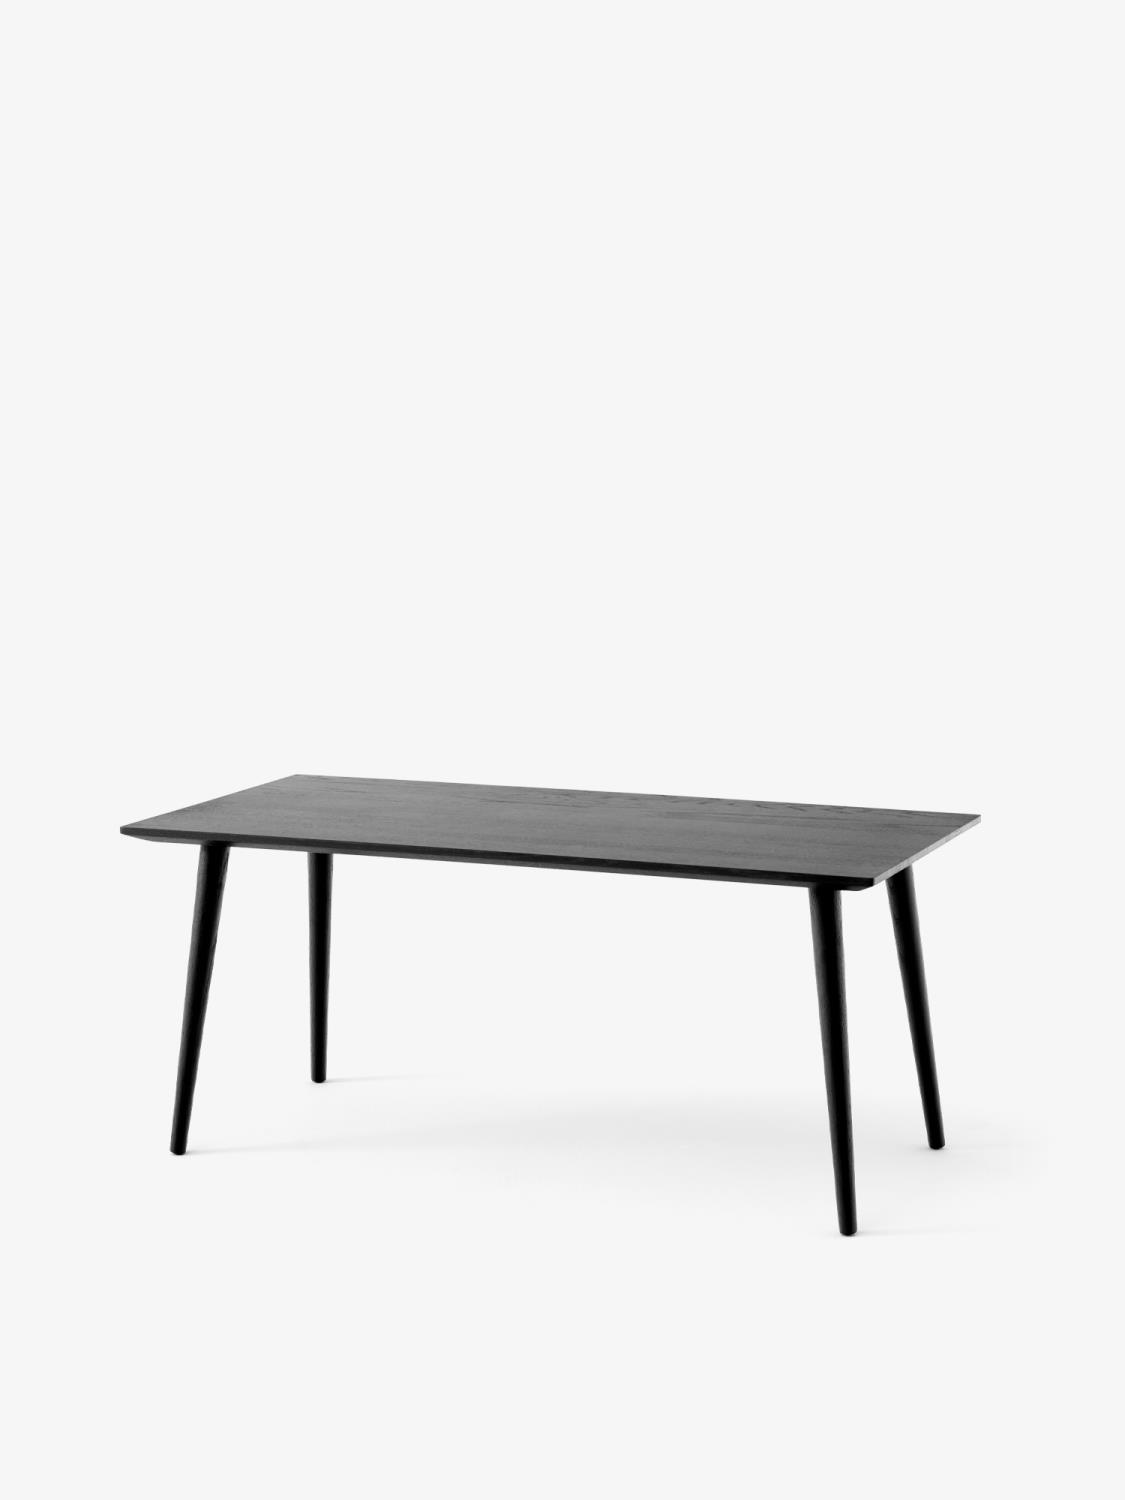 &Tradition - In Between Coffee Table SK23 - Black Lacquered Oak